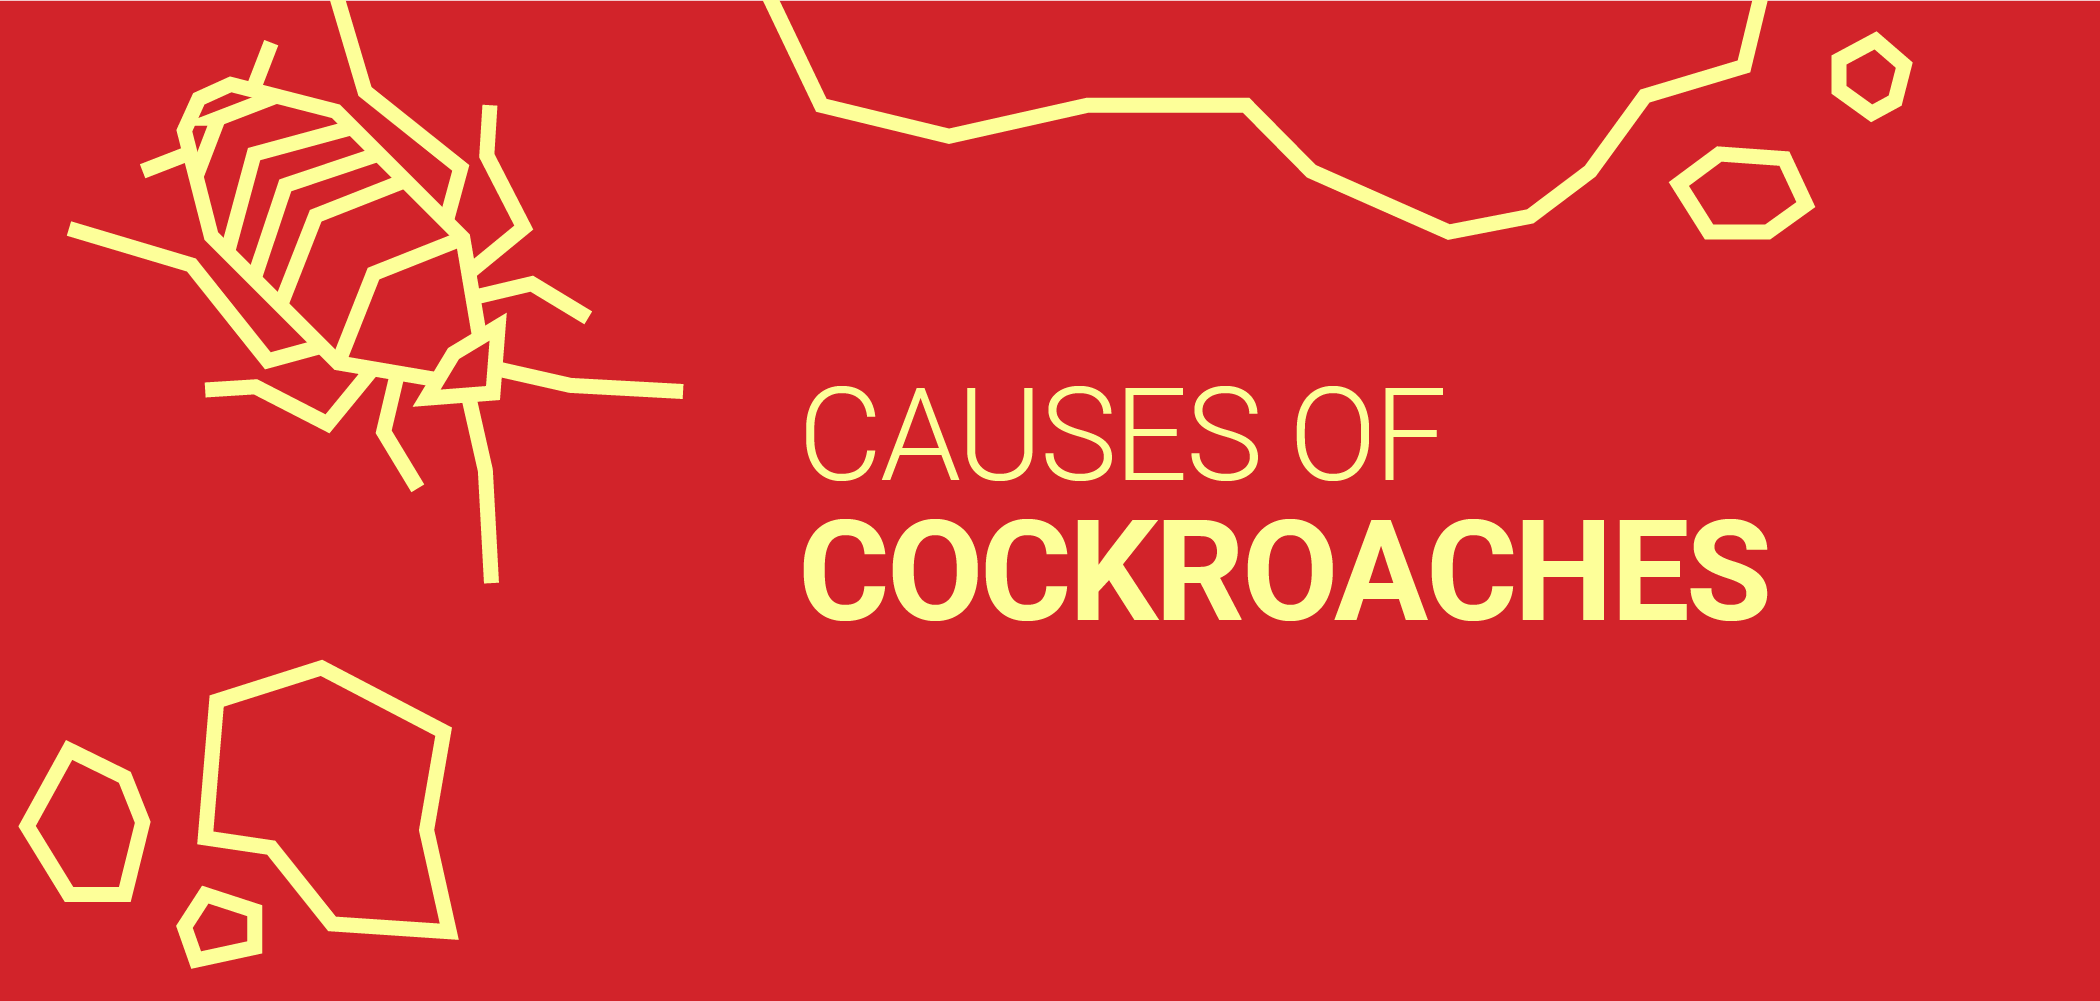 causes of cockroaches graphic